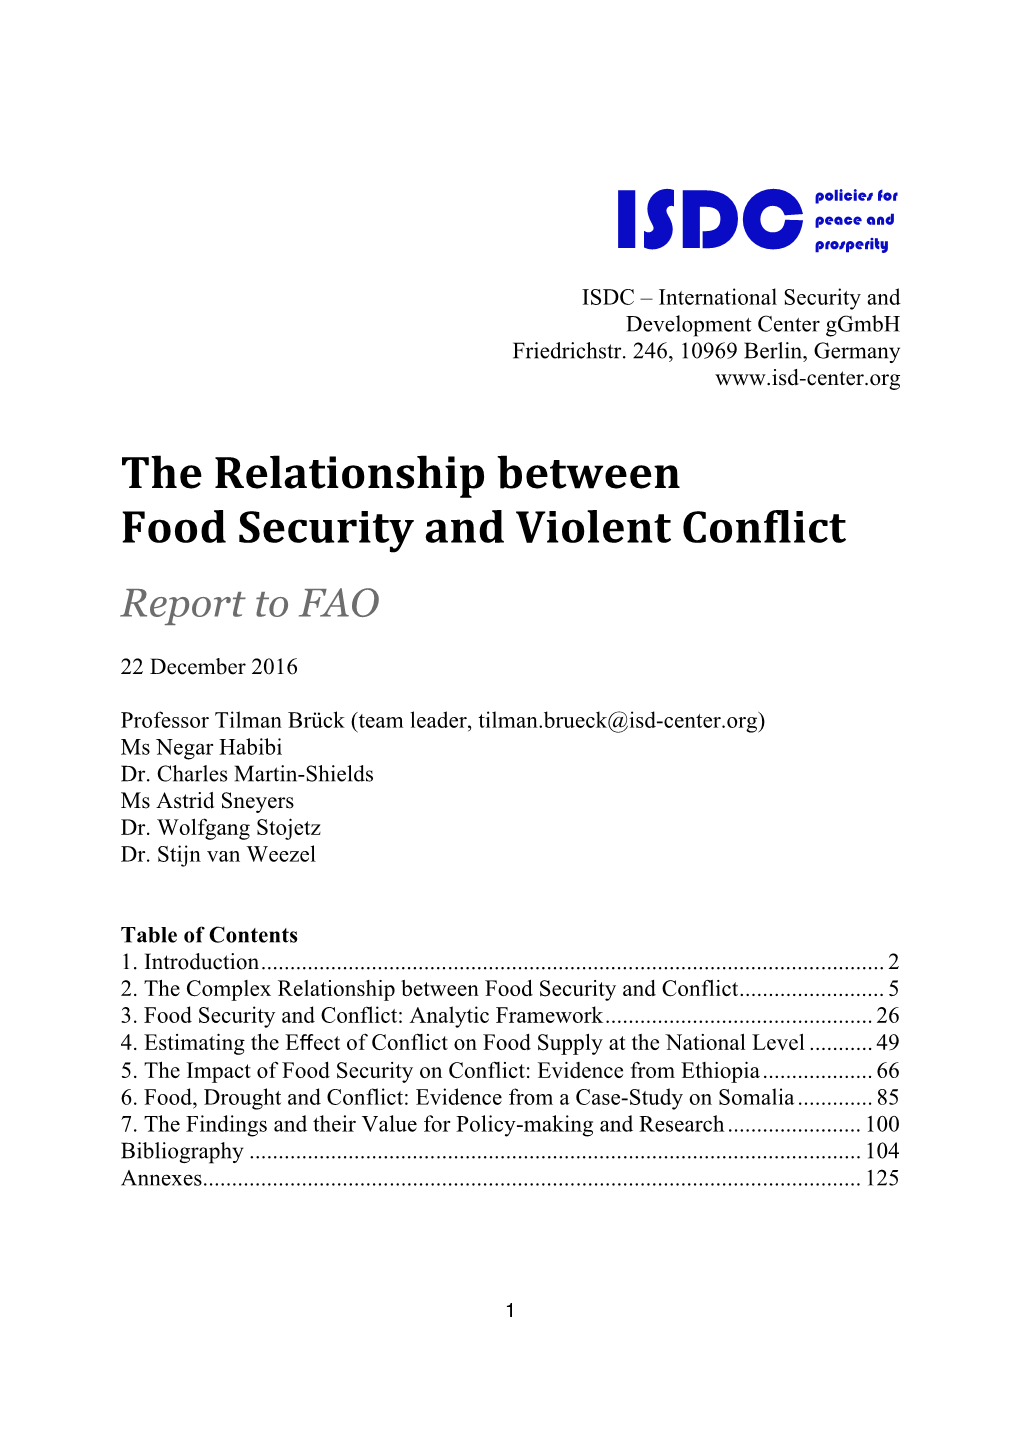 The Relationship Between Food Security and Violent Conflict